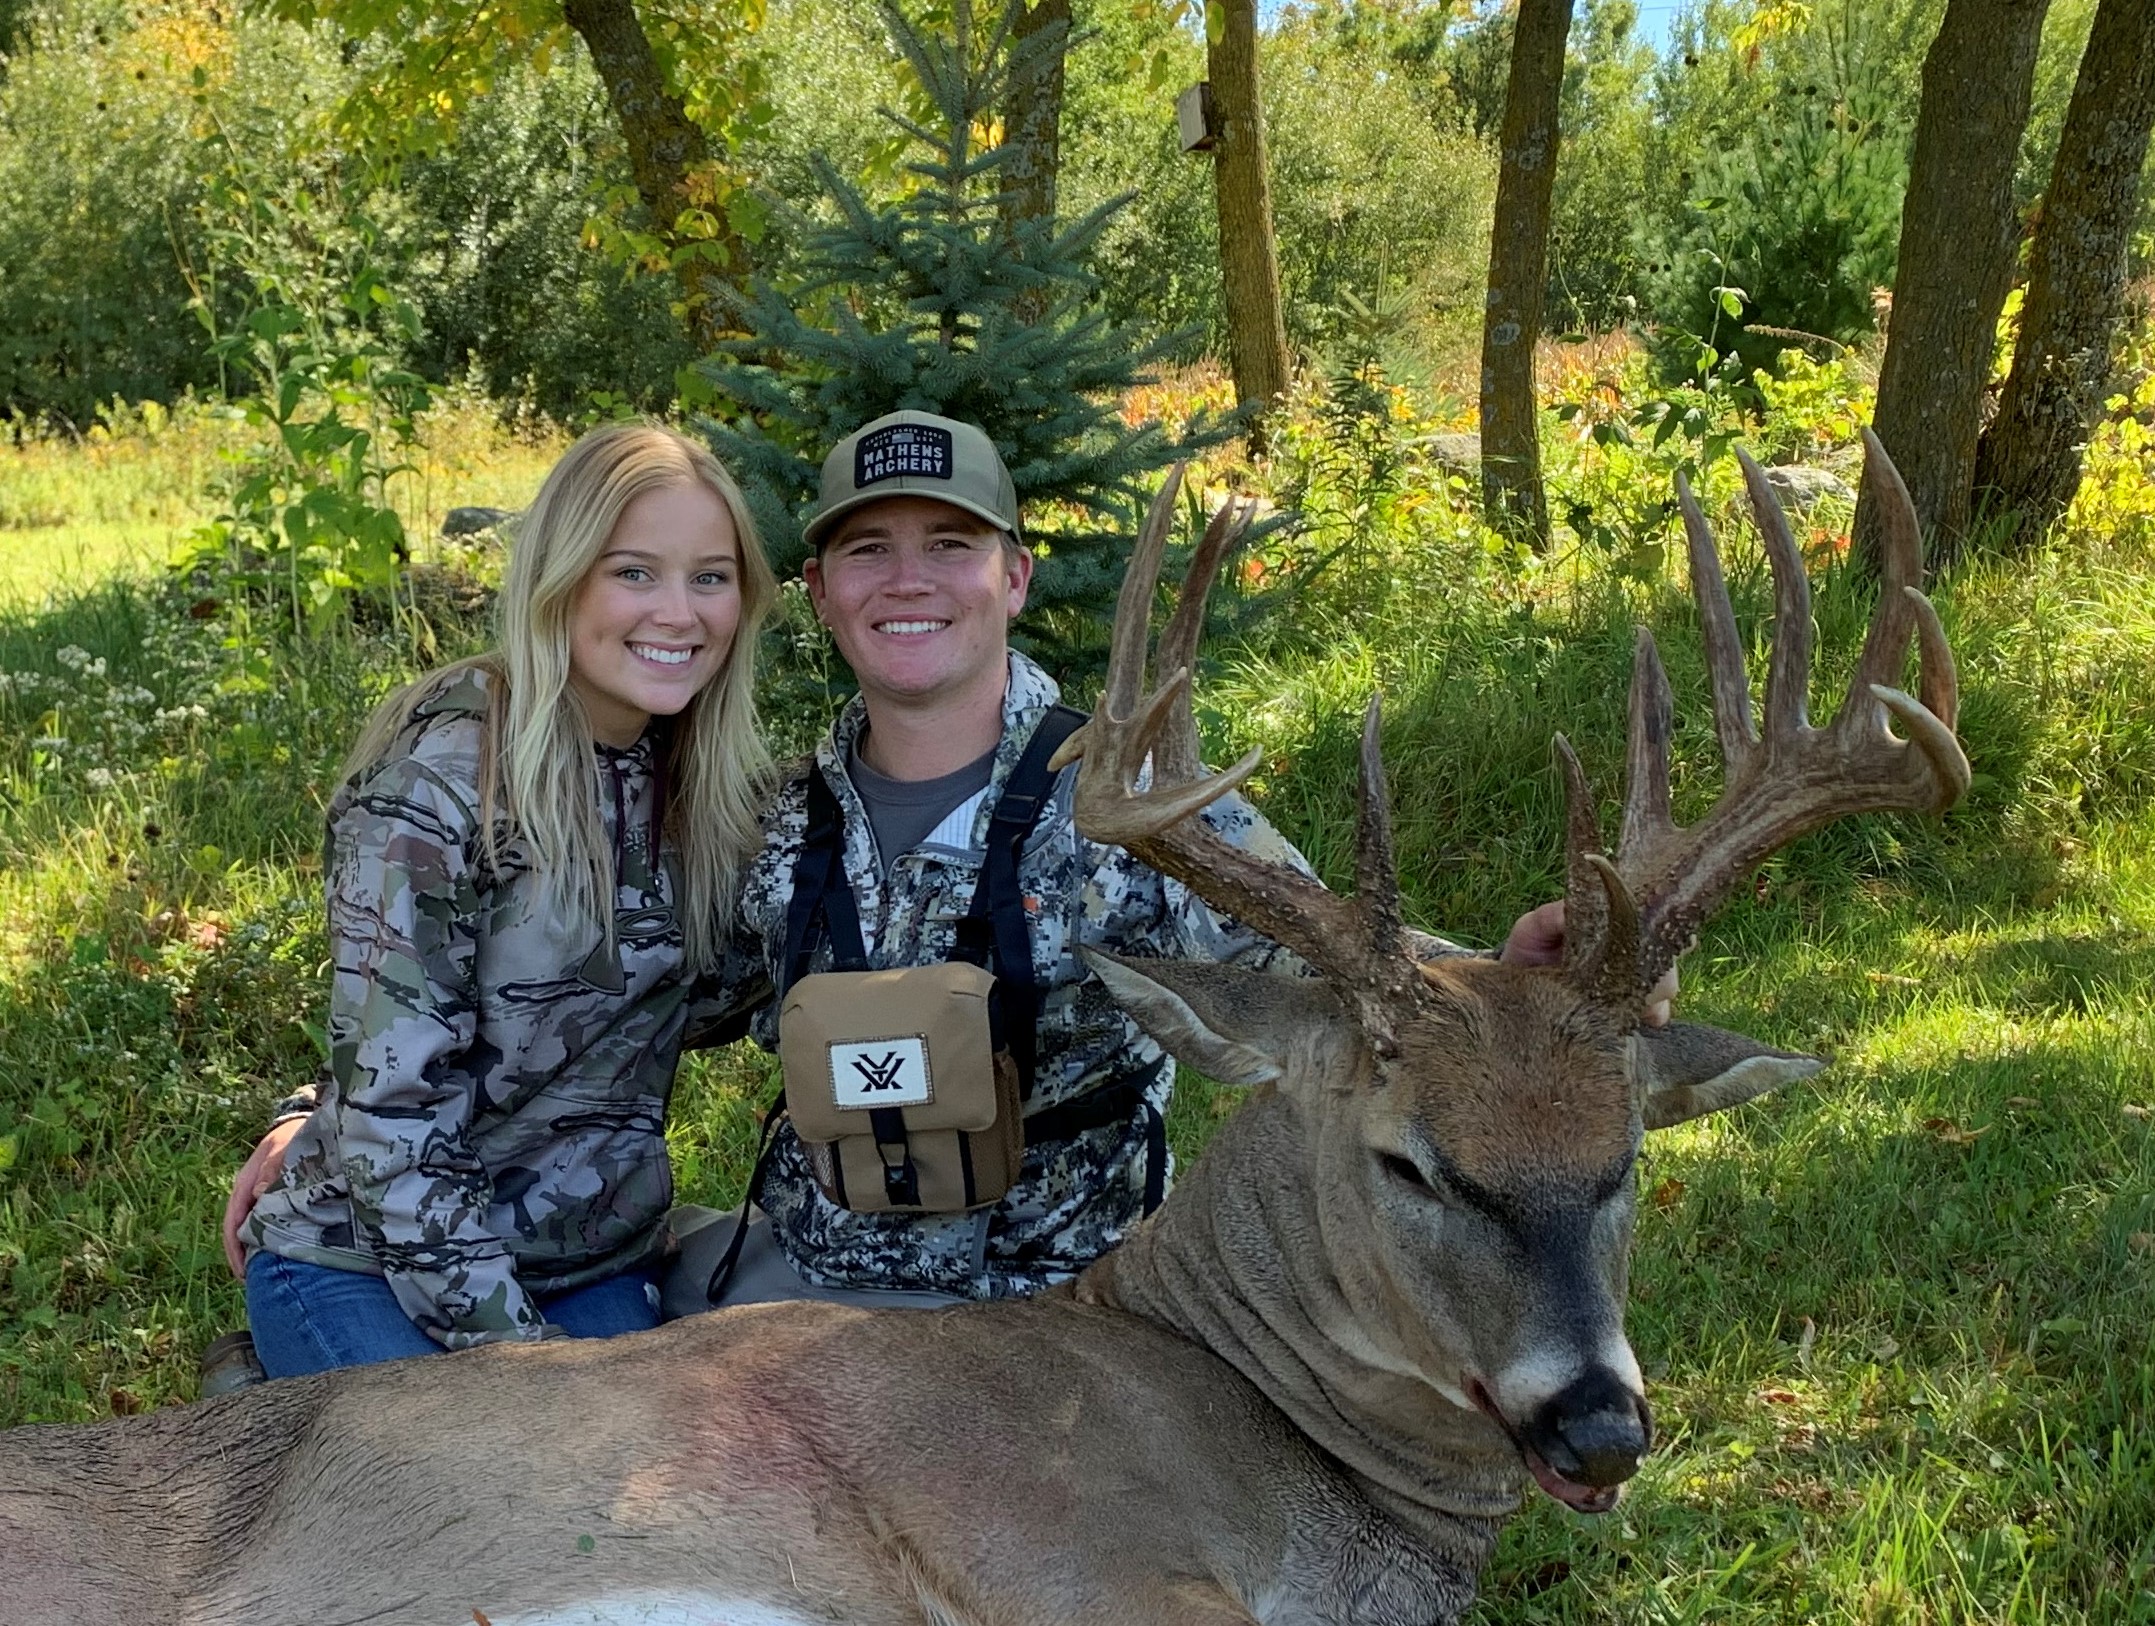 A smiling young man and woman in camo shirts sit behind a big whitetail buck.